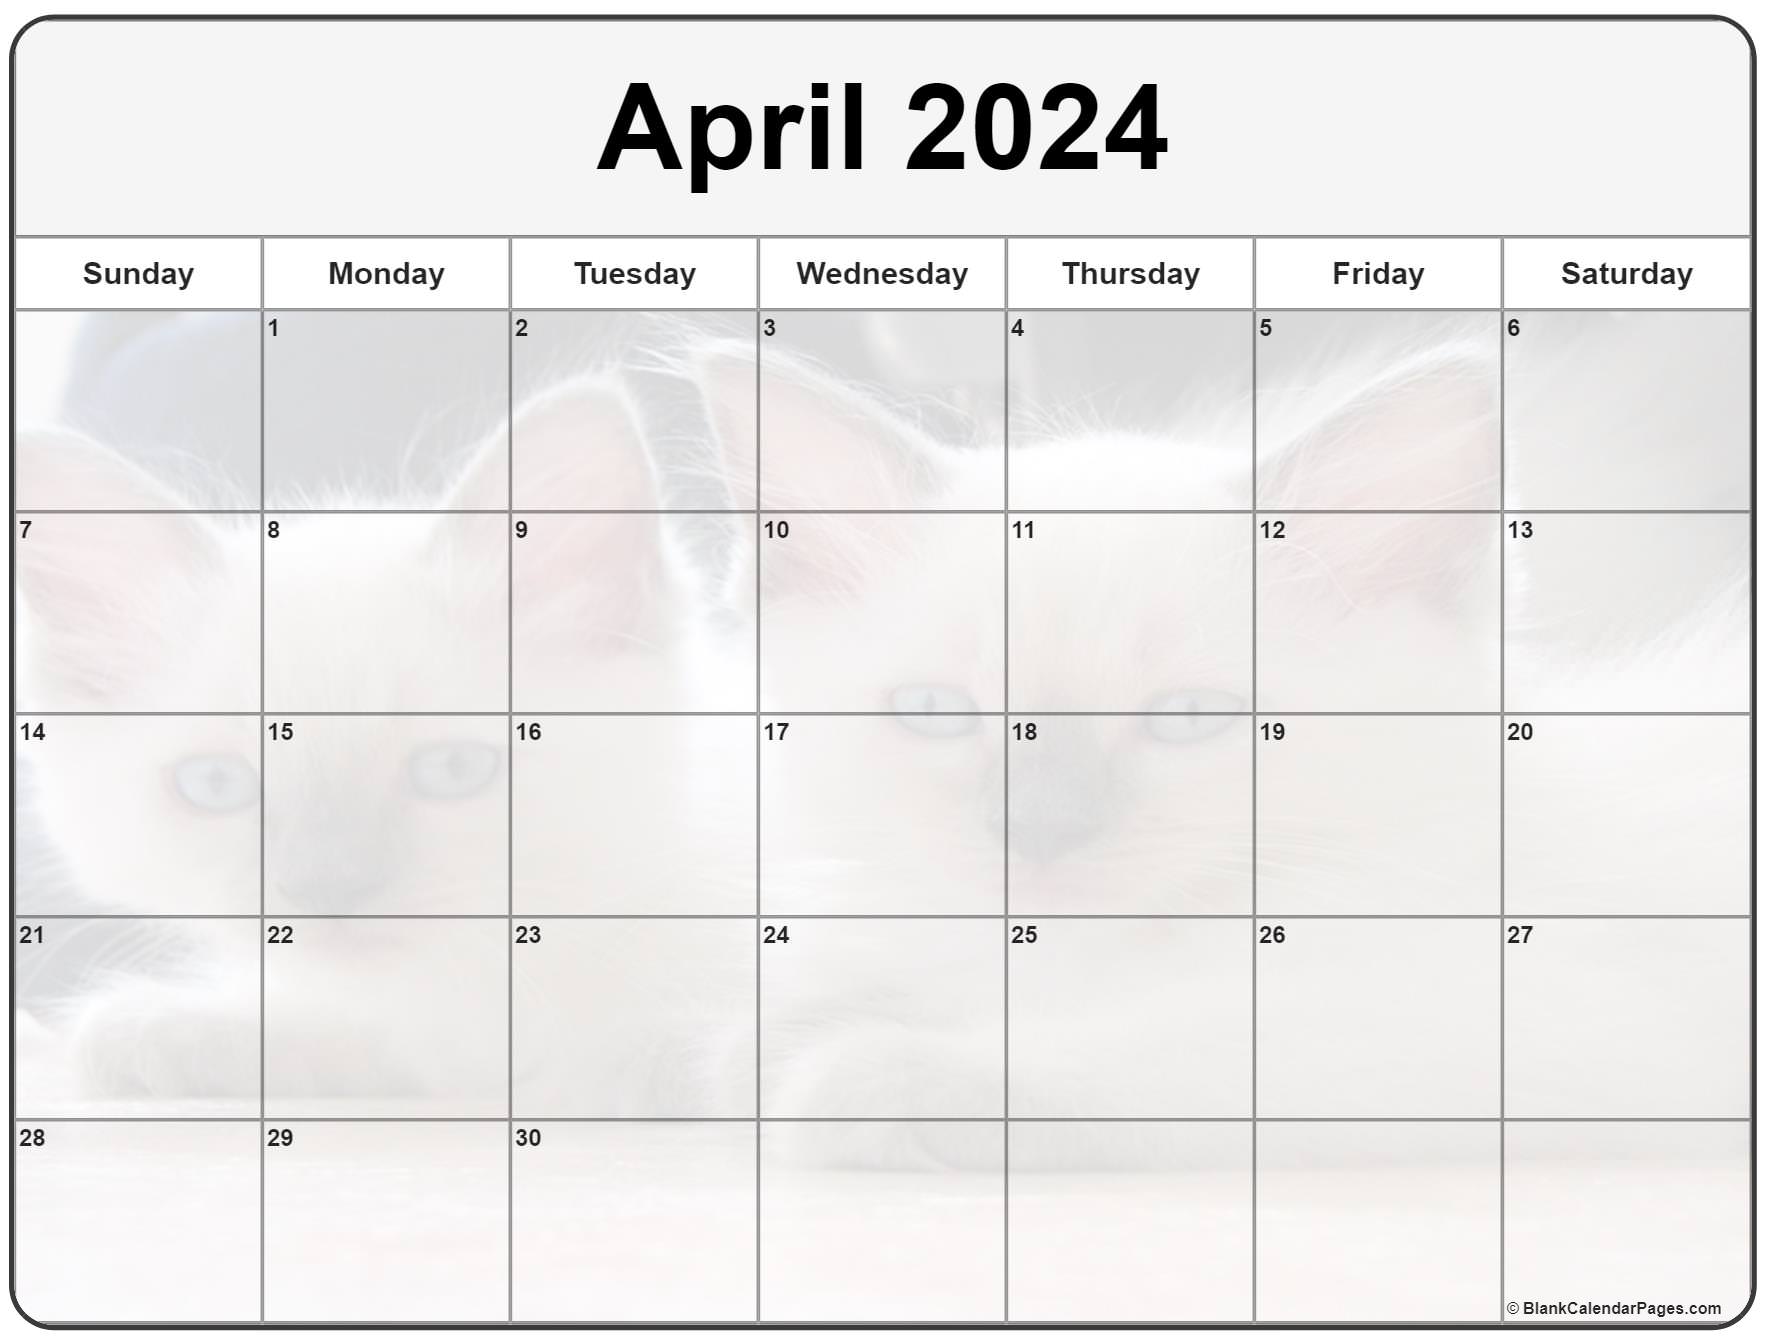 Collection of April 2024 photo calendars with image filters